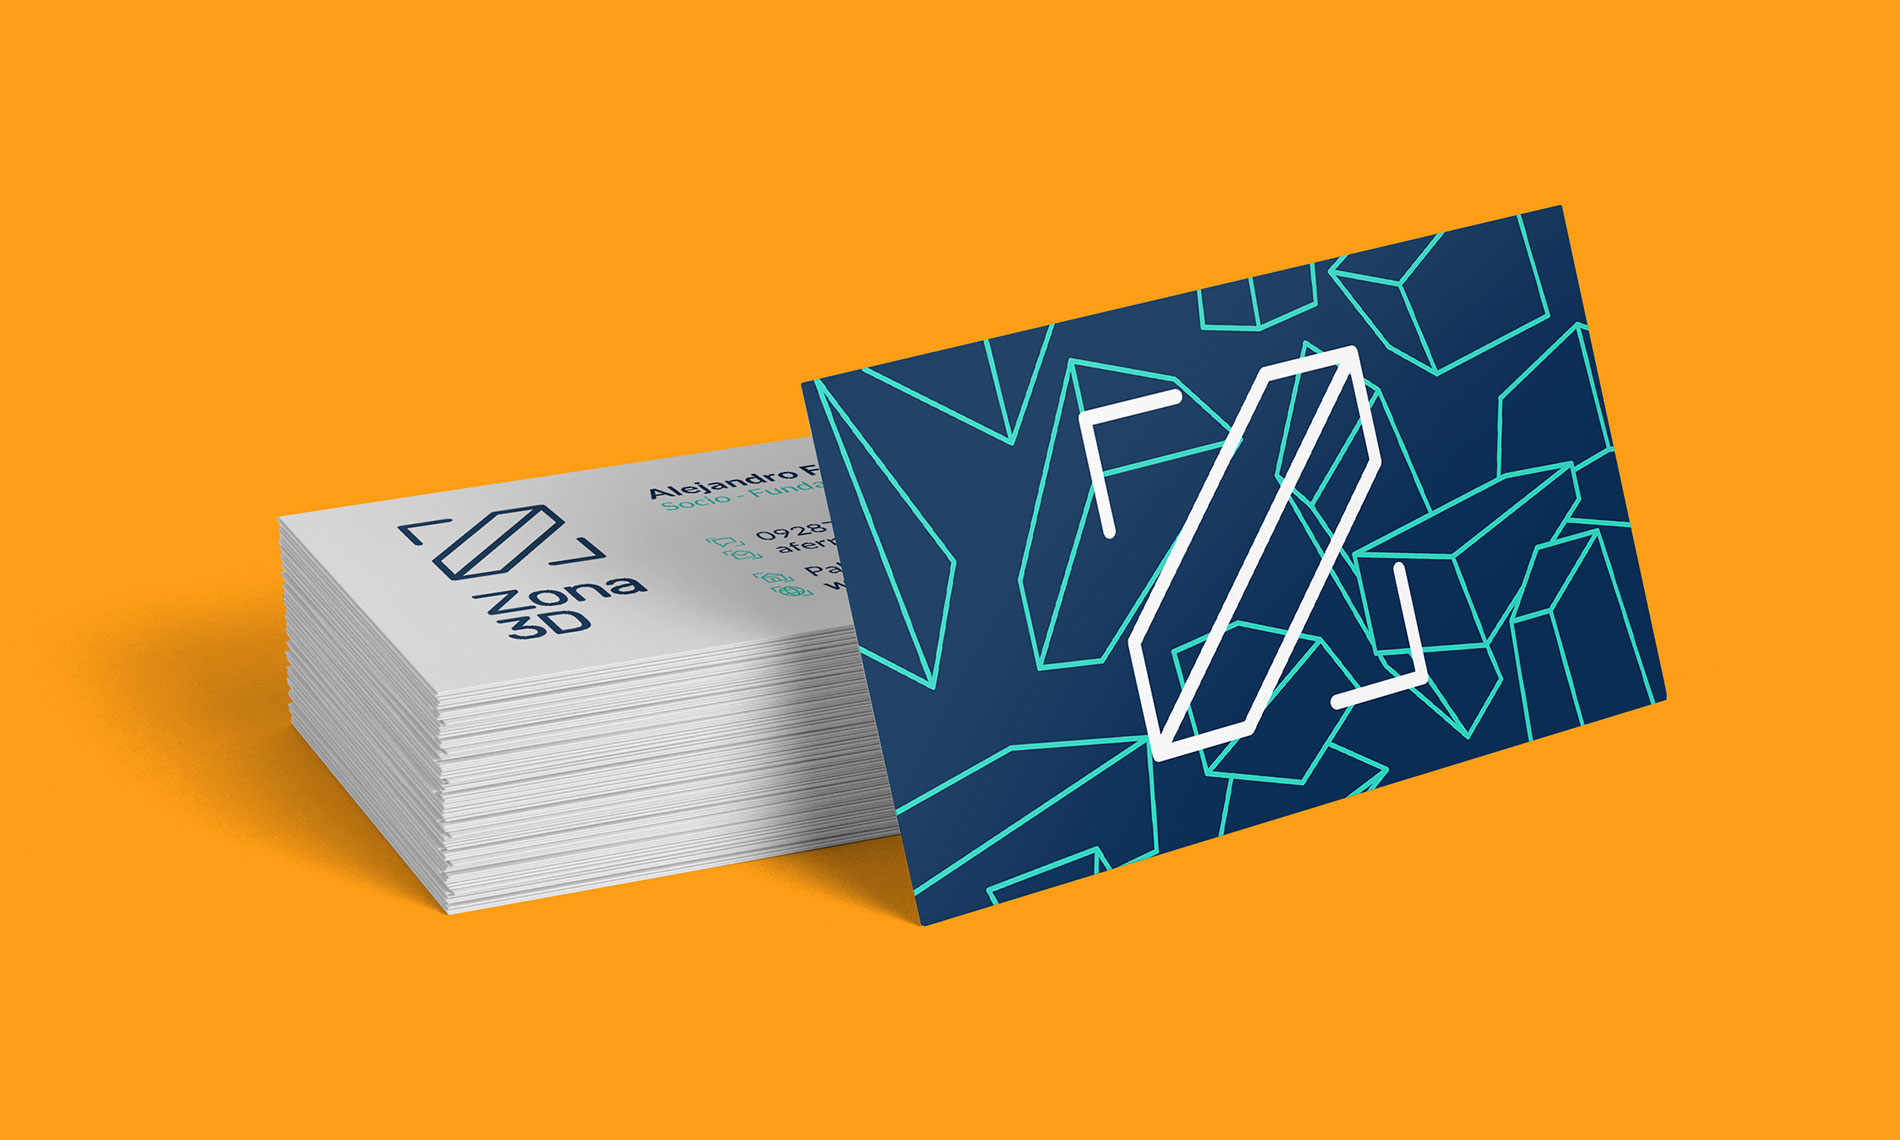 Brand Identity for Zona 3D / Business cards